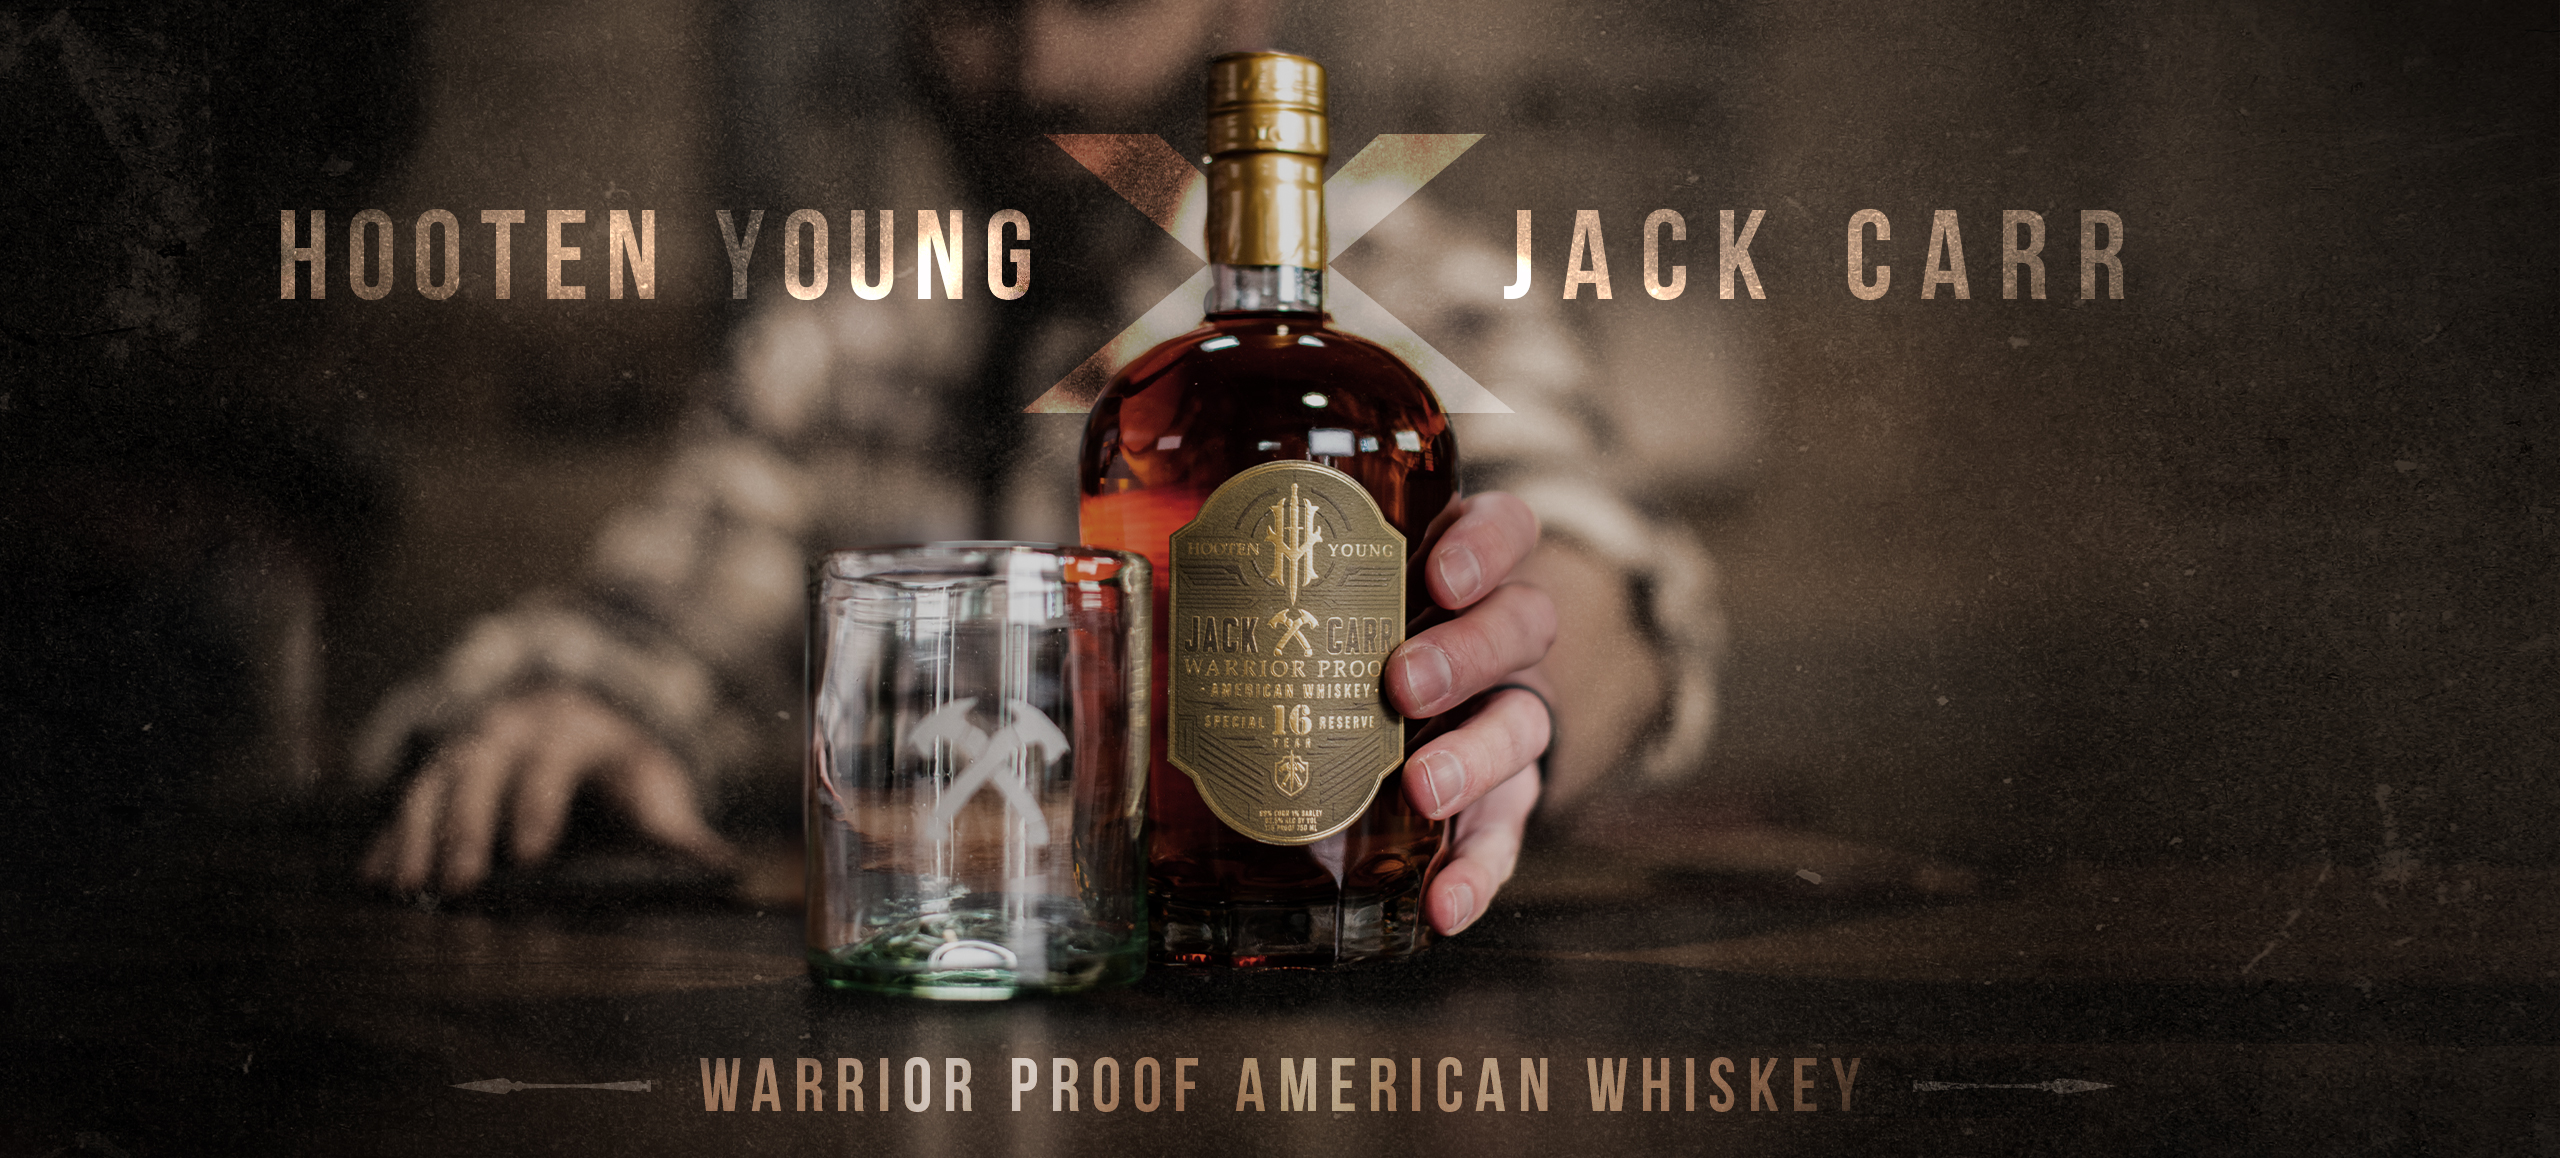 hooten young and jack carr whiskey